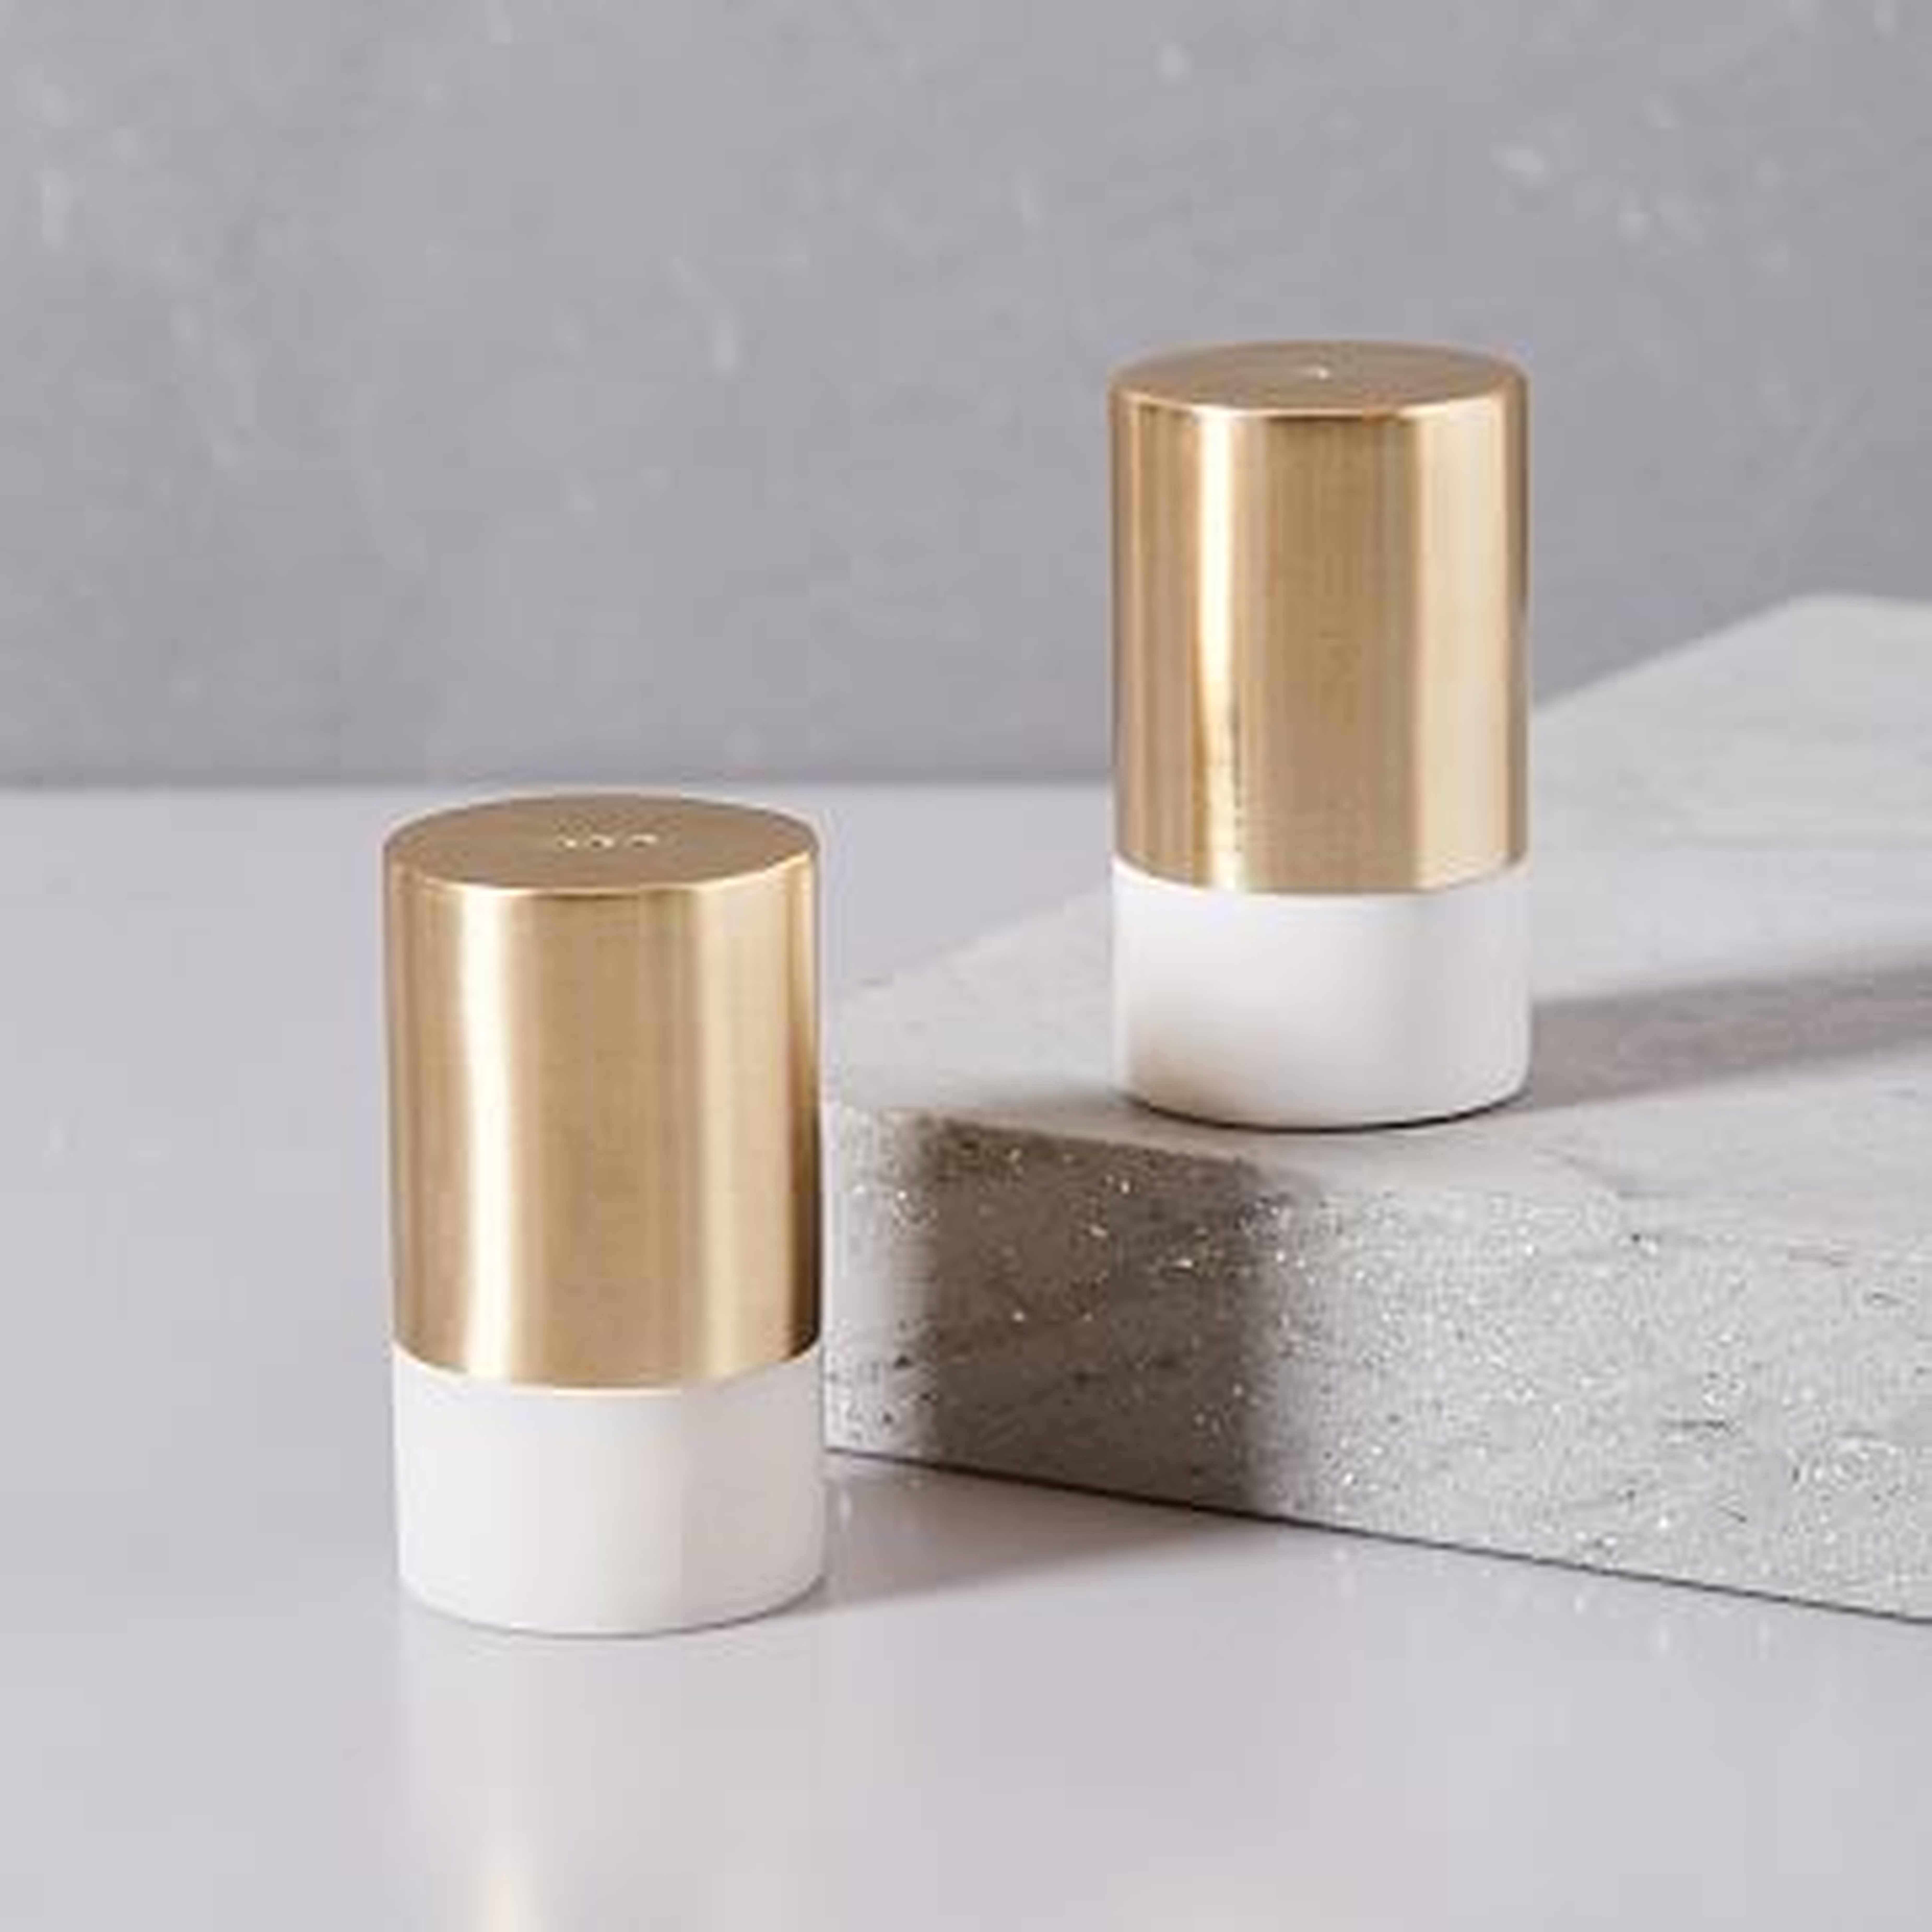 Marble and Brass Salt + Pepper Shakers, Set of 2, White - West Elm